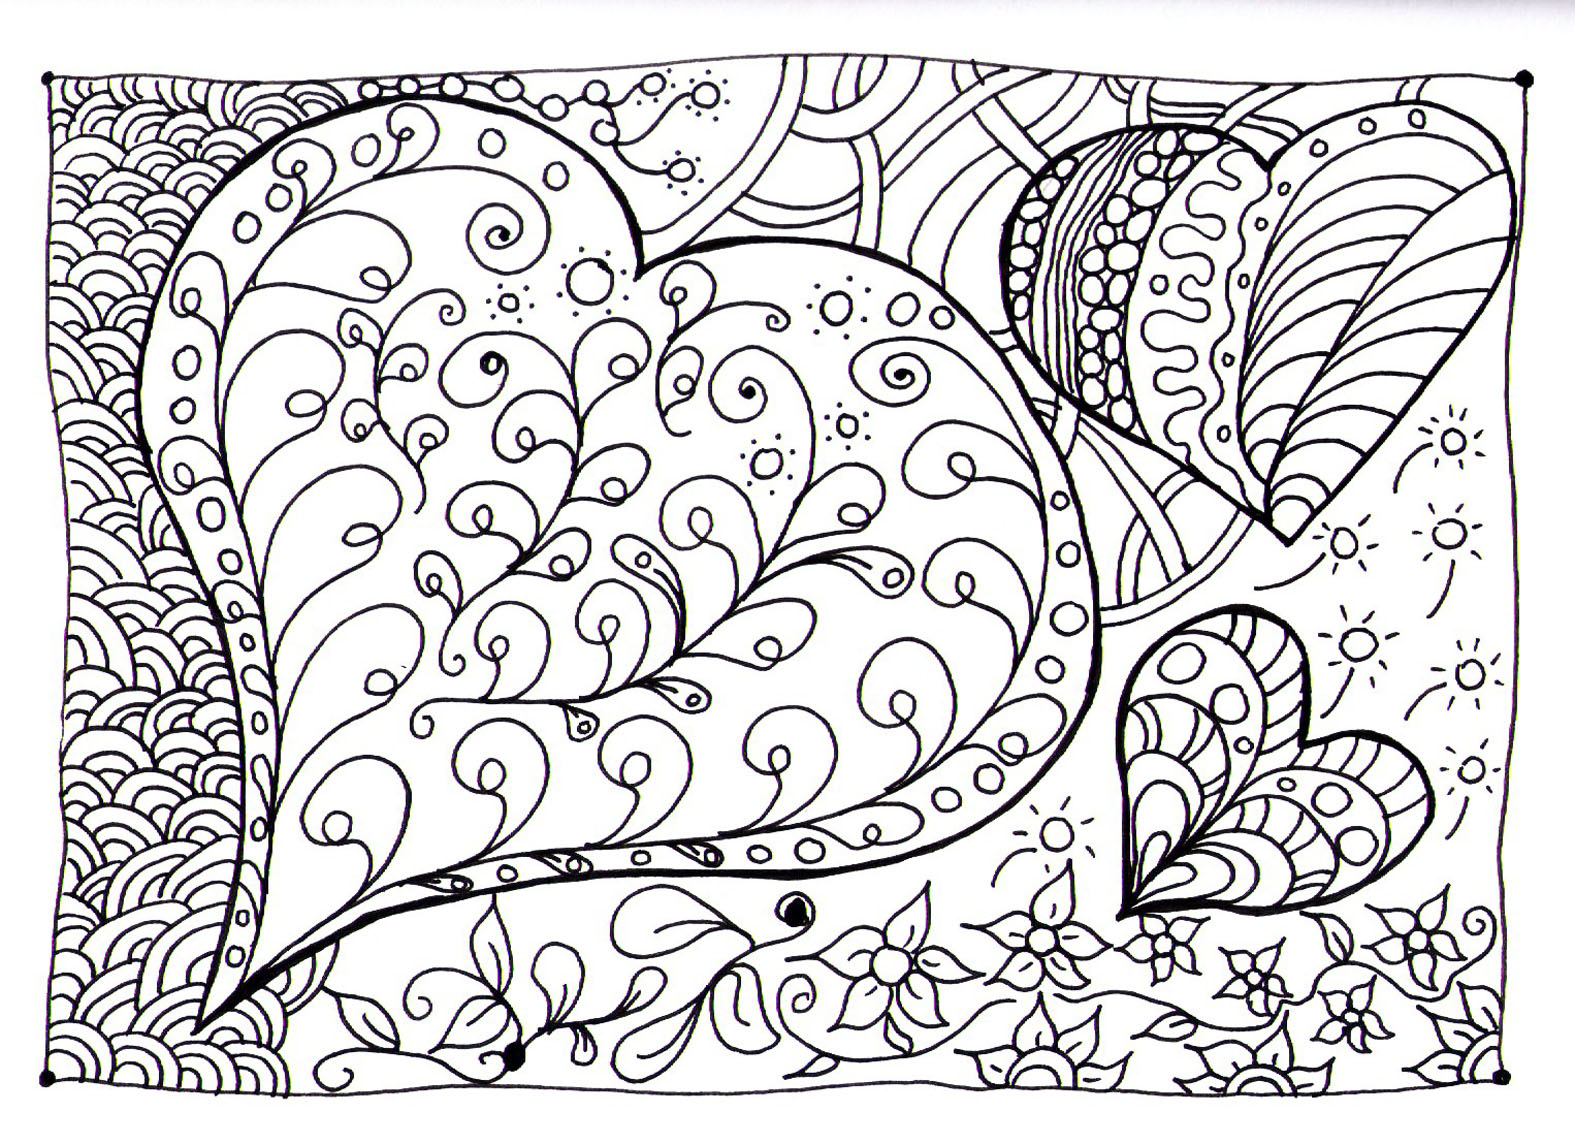 Coloring Pages ~ Coloring Pages Doodle Free Printable Google Page - Free Printable Doodle Patterns